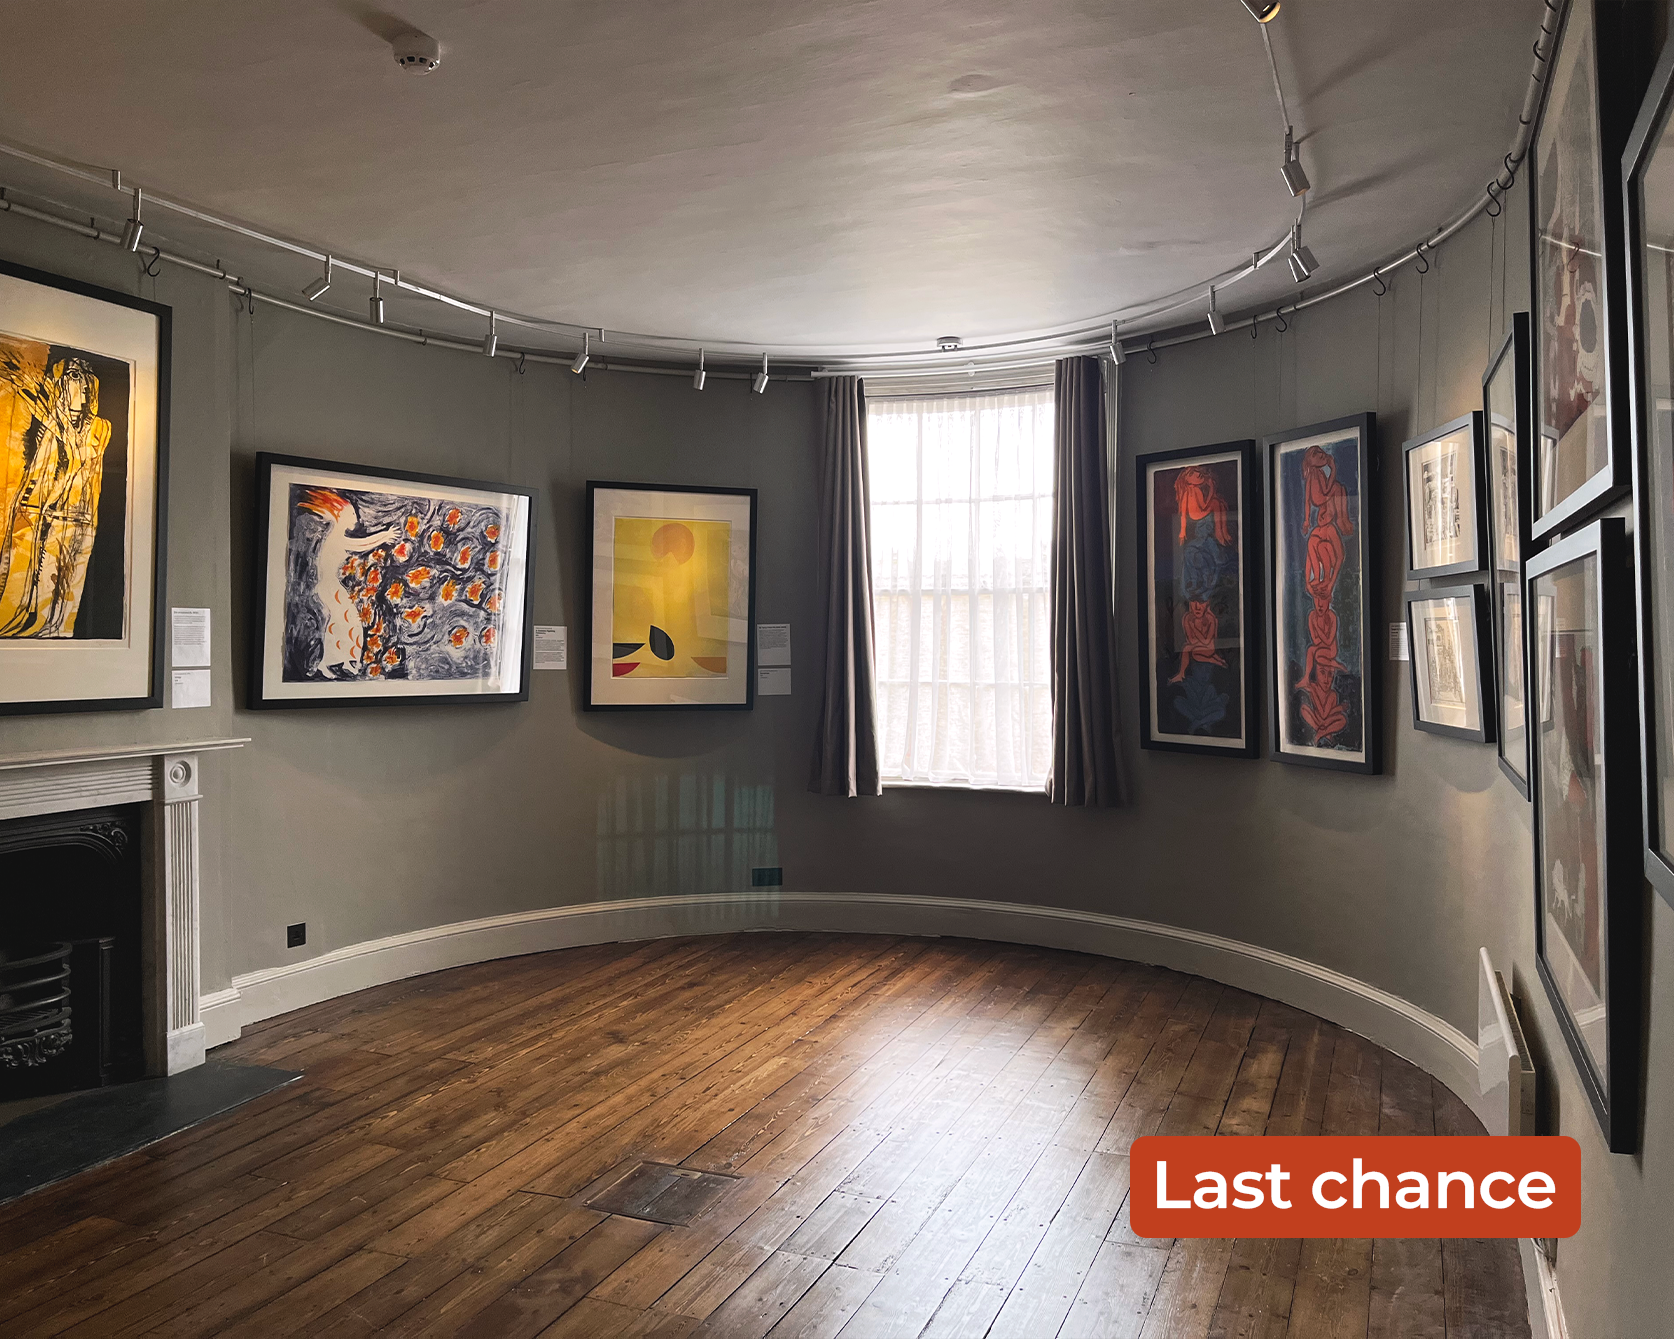 An image taken of the Striking Editions lithograph exhibition. There are numerous prints framed on the walls. The Upper Bow Room has a rounded back wall. The words 'Last chance' are overlayed in the bottom right corner.